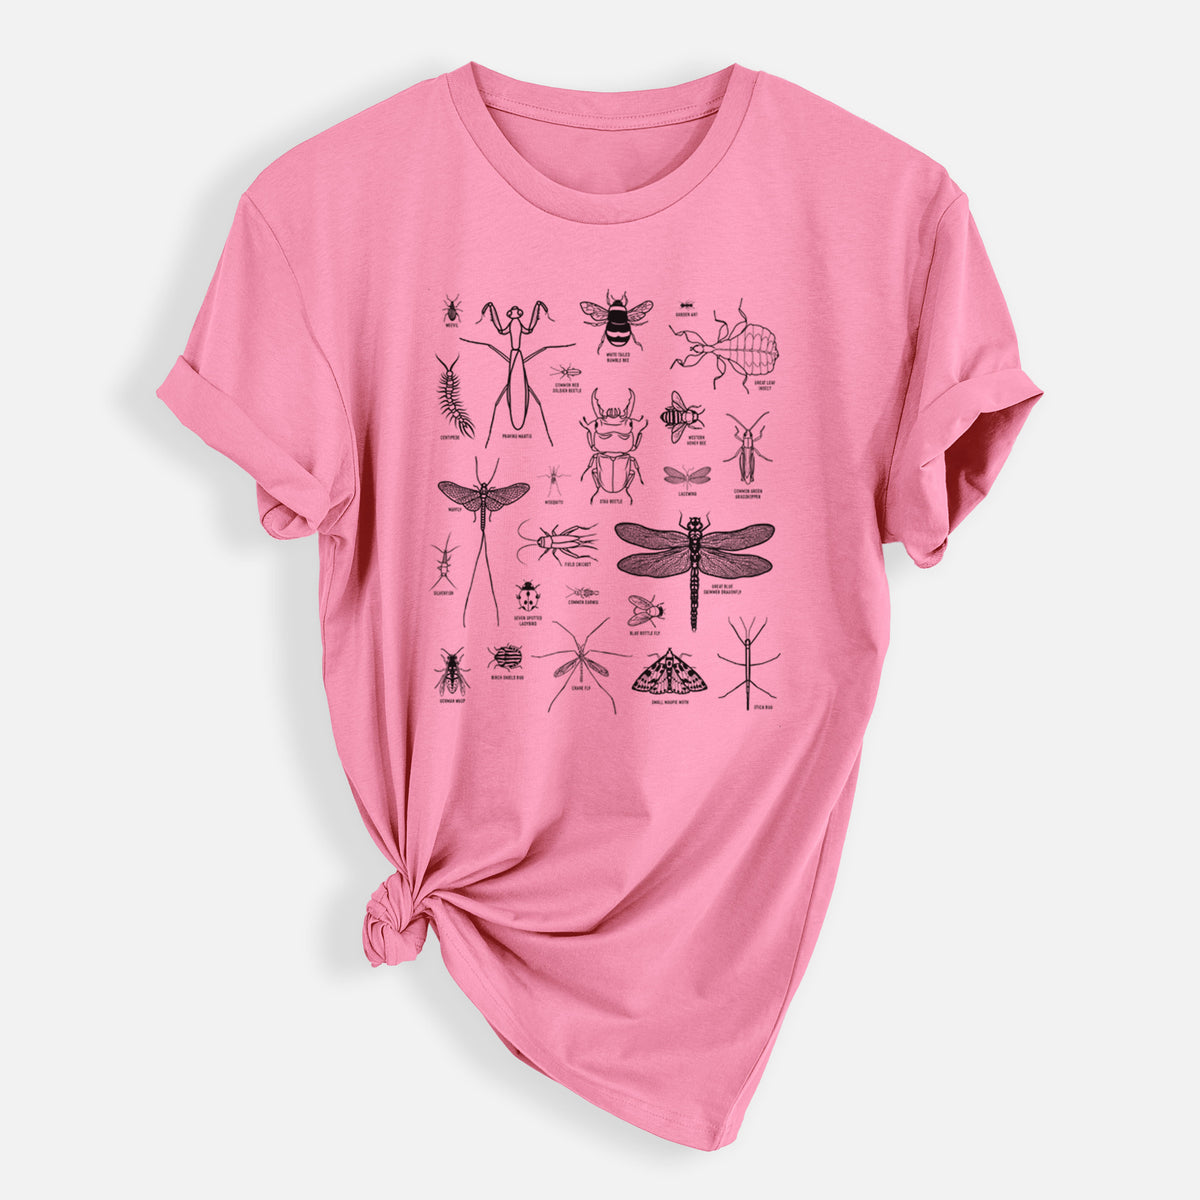 Chart of Arthropods/Insects - Mens Everyday Staple Tee